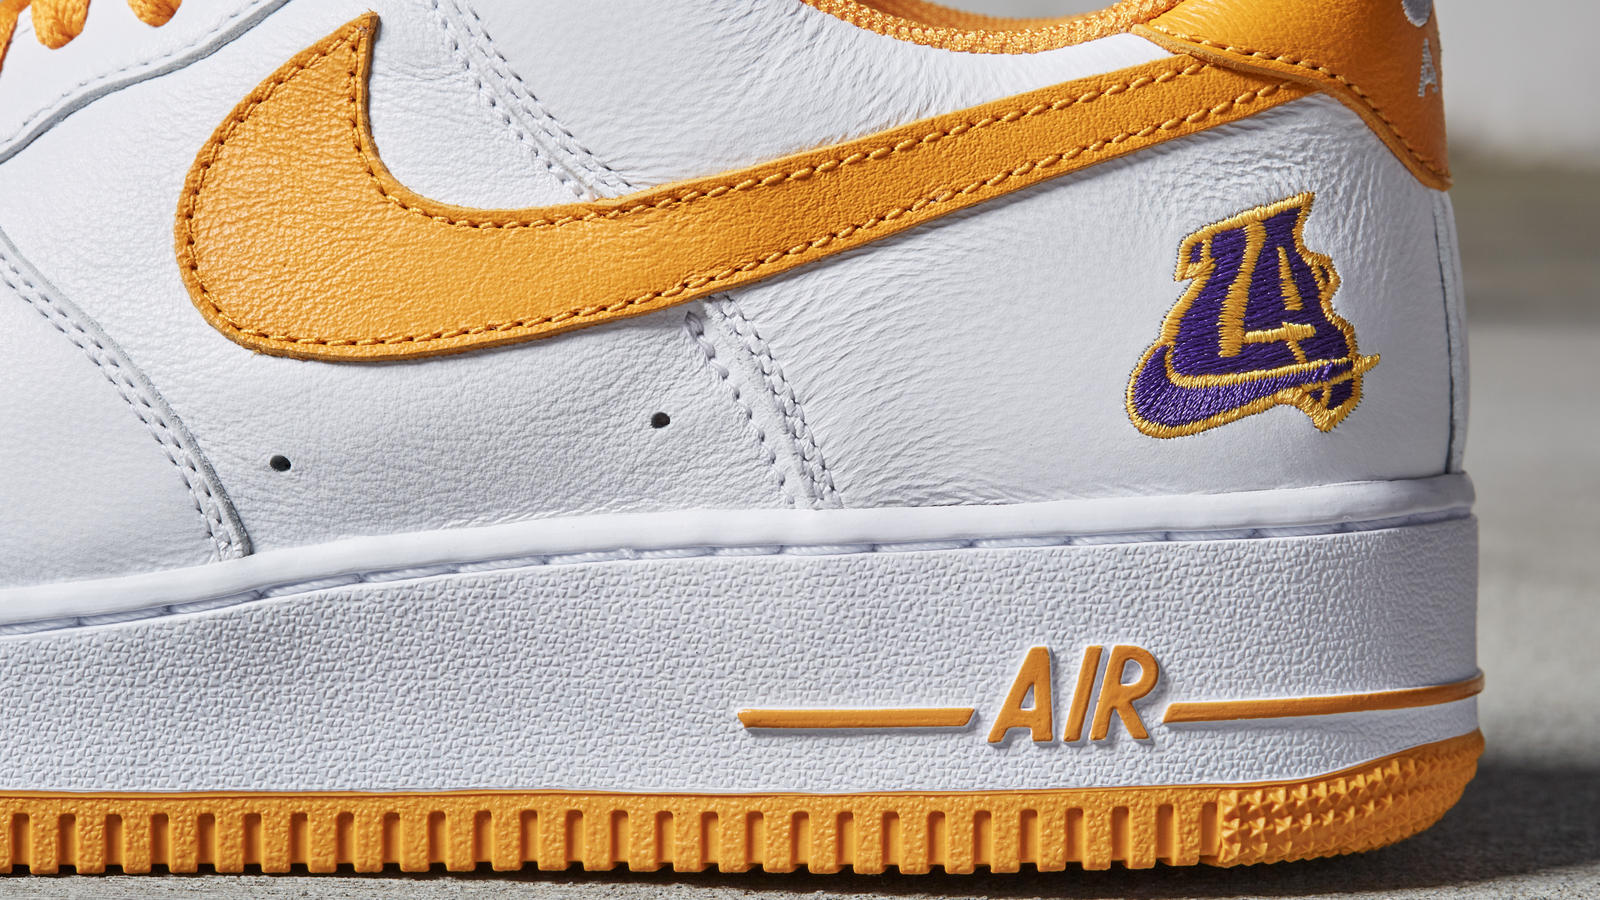 Another Nike Air Force 1 Joins the 'Worldwide' Range - Sneaker Freaker